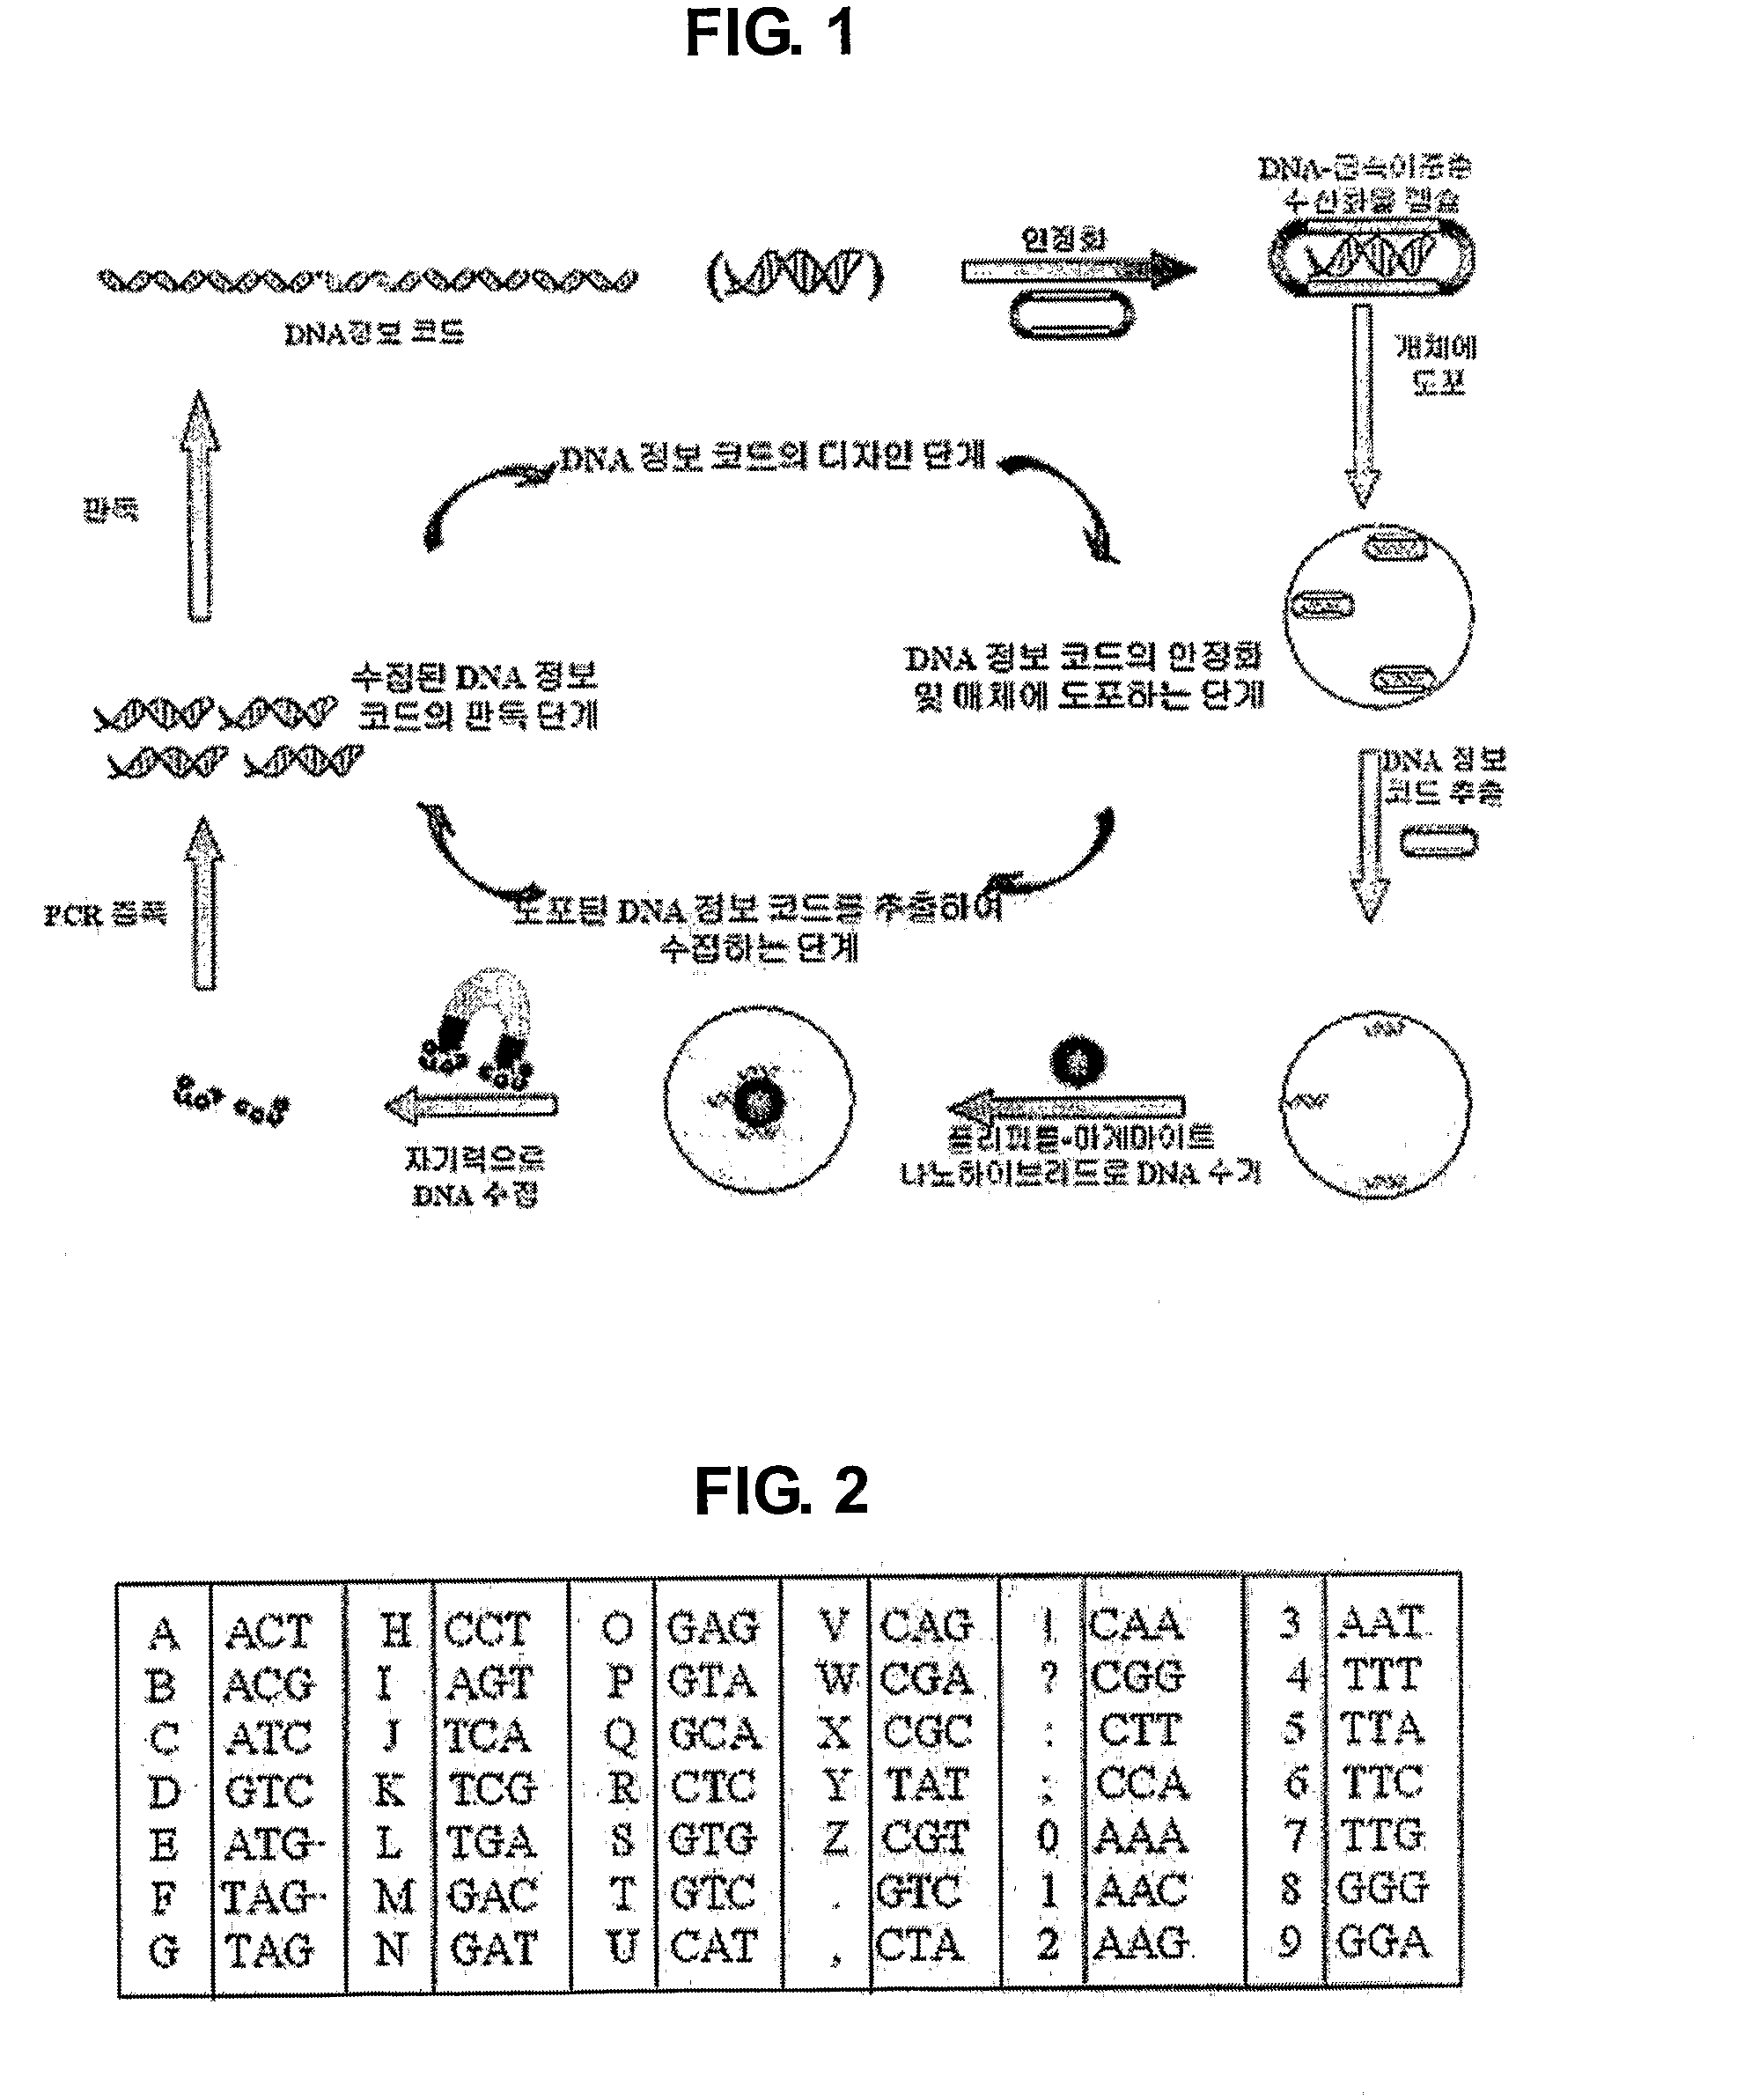 Information Code System Using Dna Sequences